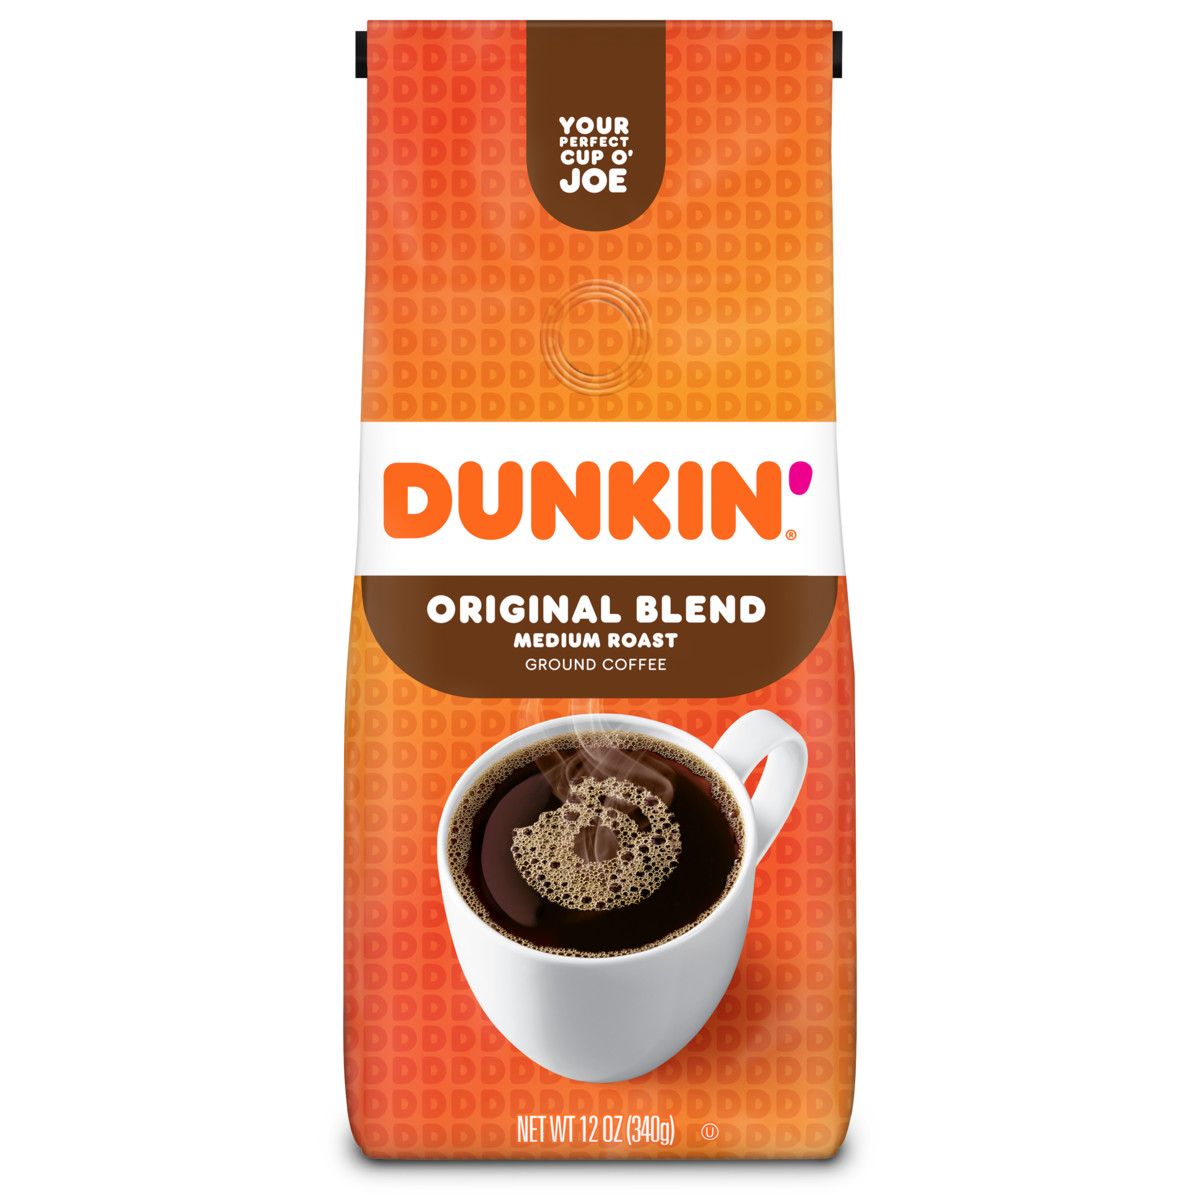 Dunkin' Original Blend Medium Roast Ground Coffee in an orange bag with an image of a white mug filled with steaming coffee on it